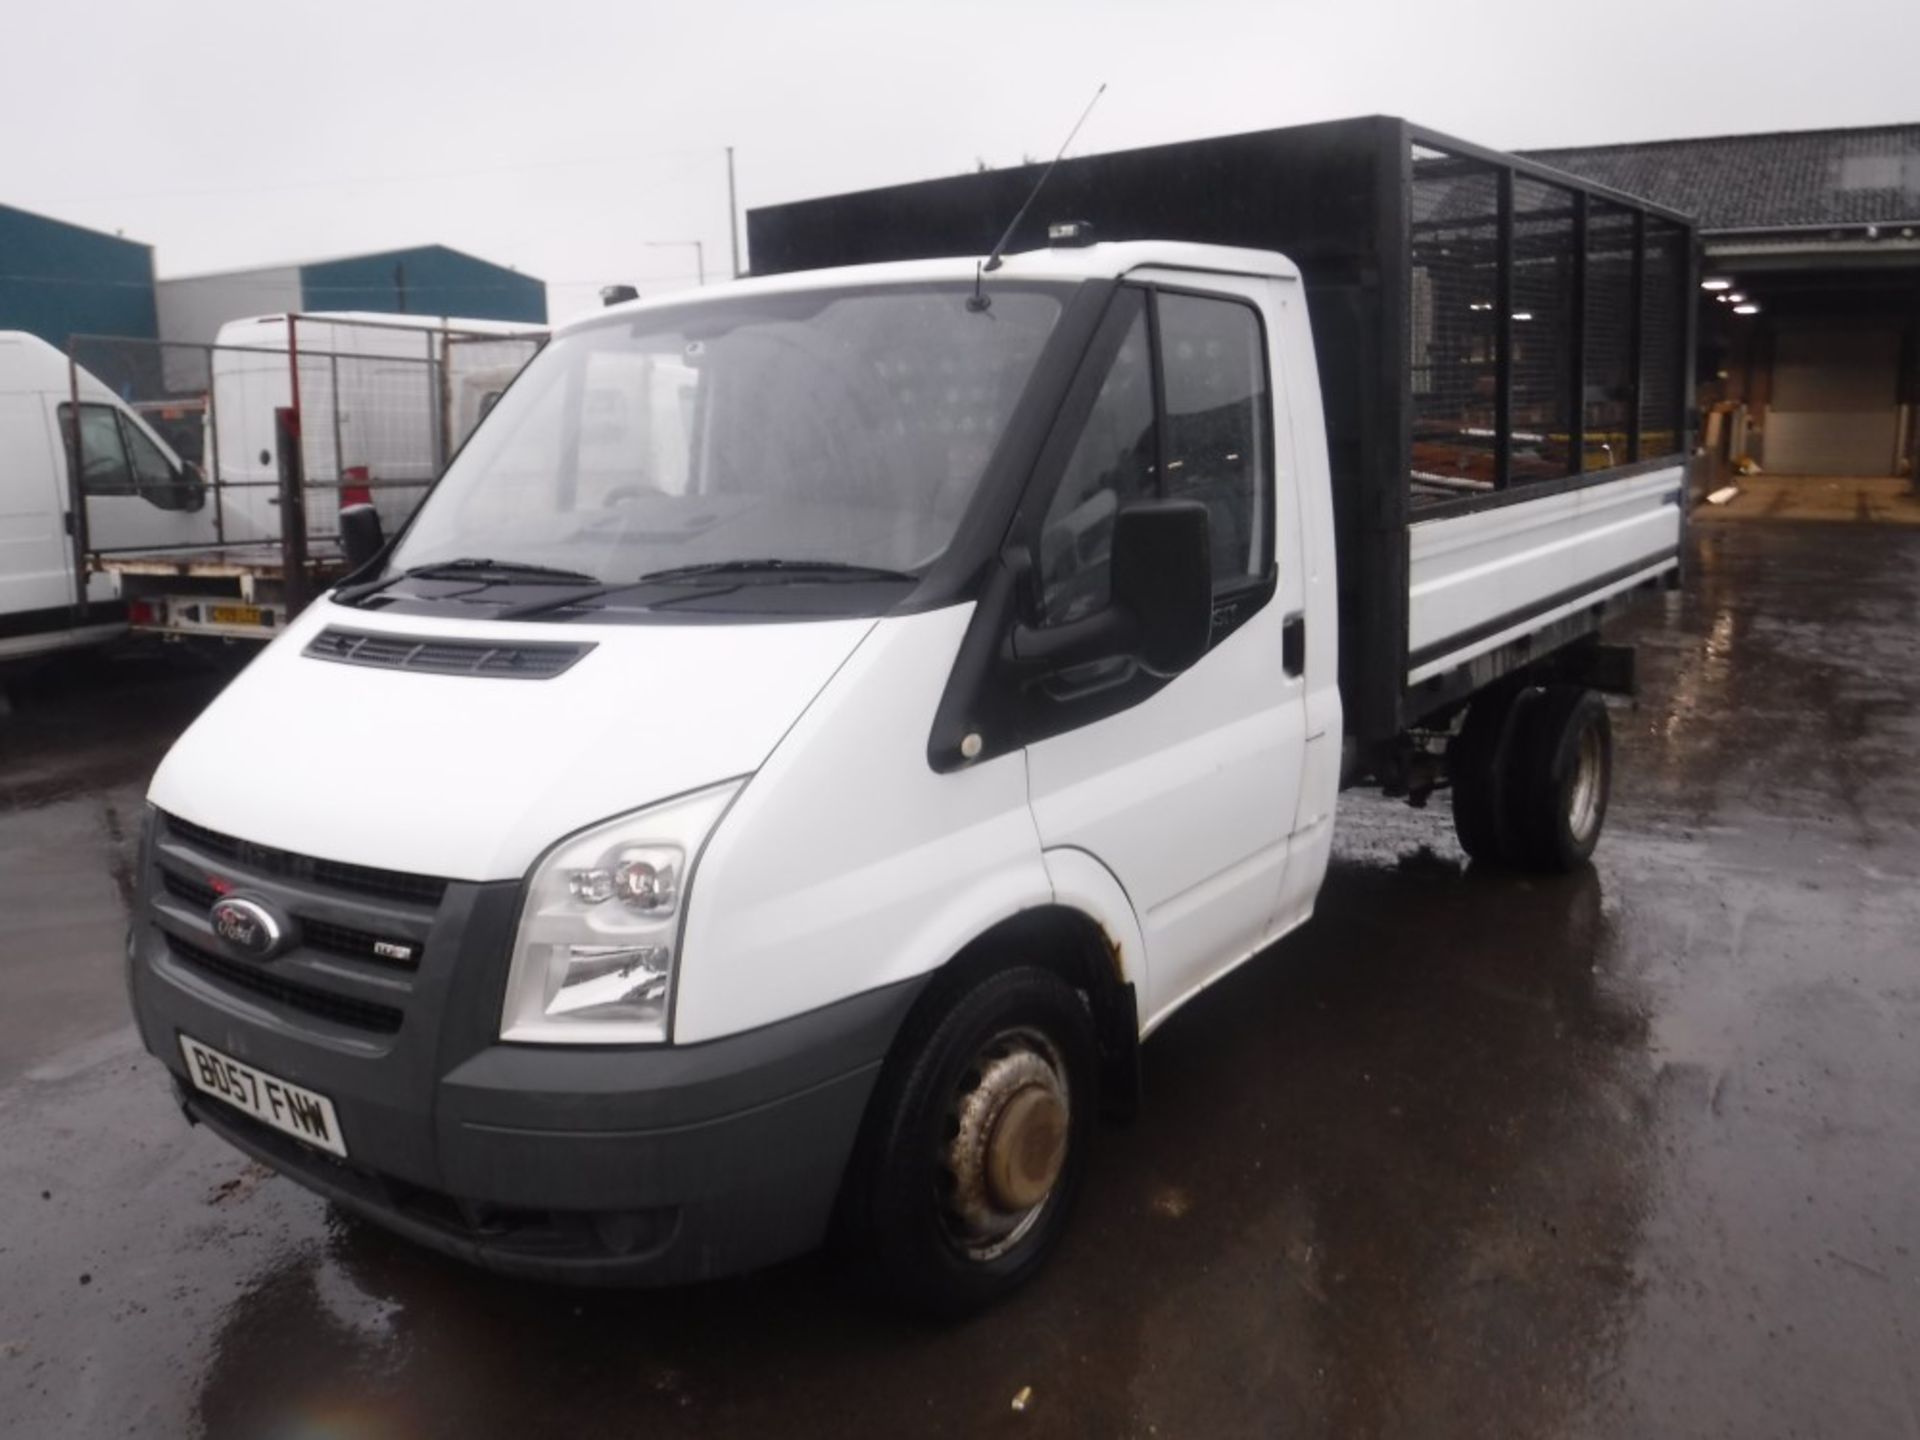 57 reg FORD TRANSIT 100 T350M RWD TIPPER, 1ST REG 02/08, 112593M WARRANTED, V5 HERE, 1 OWNER FROM - Image 2 of 5